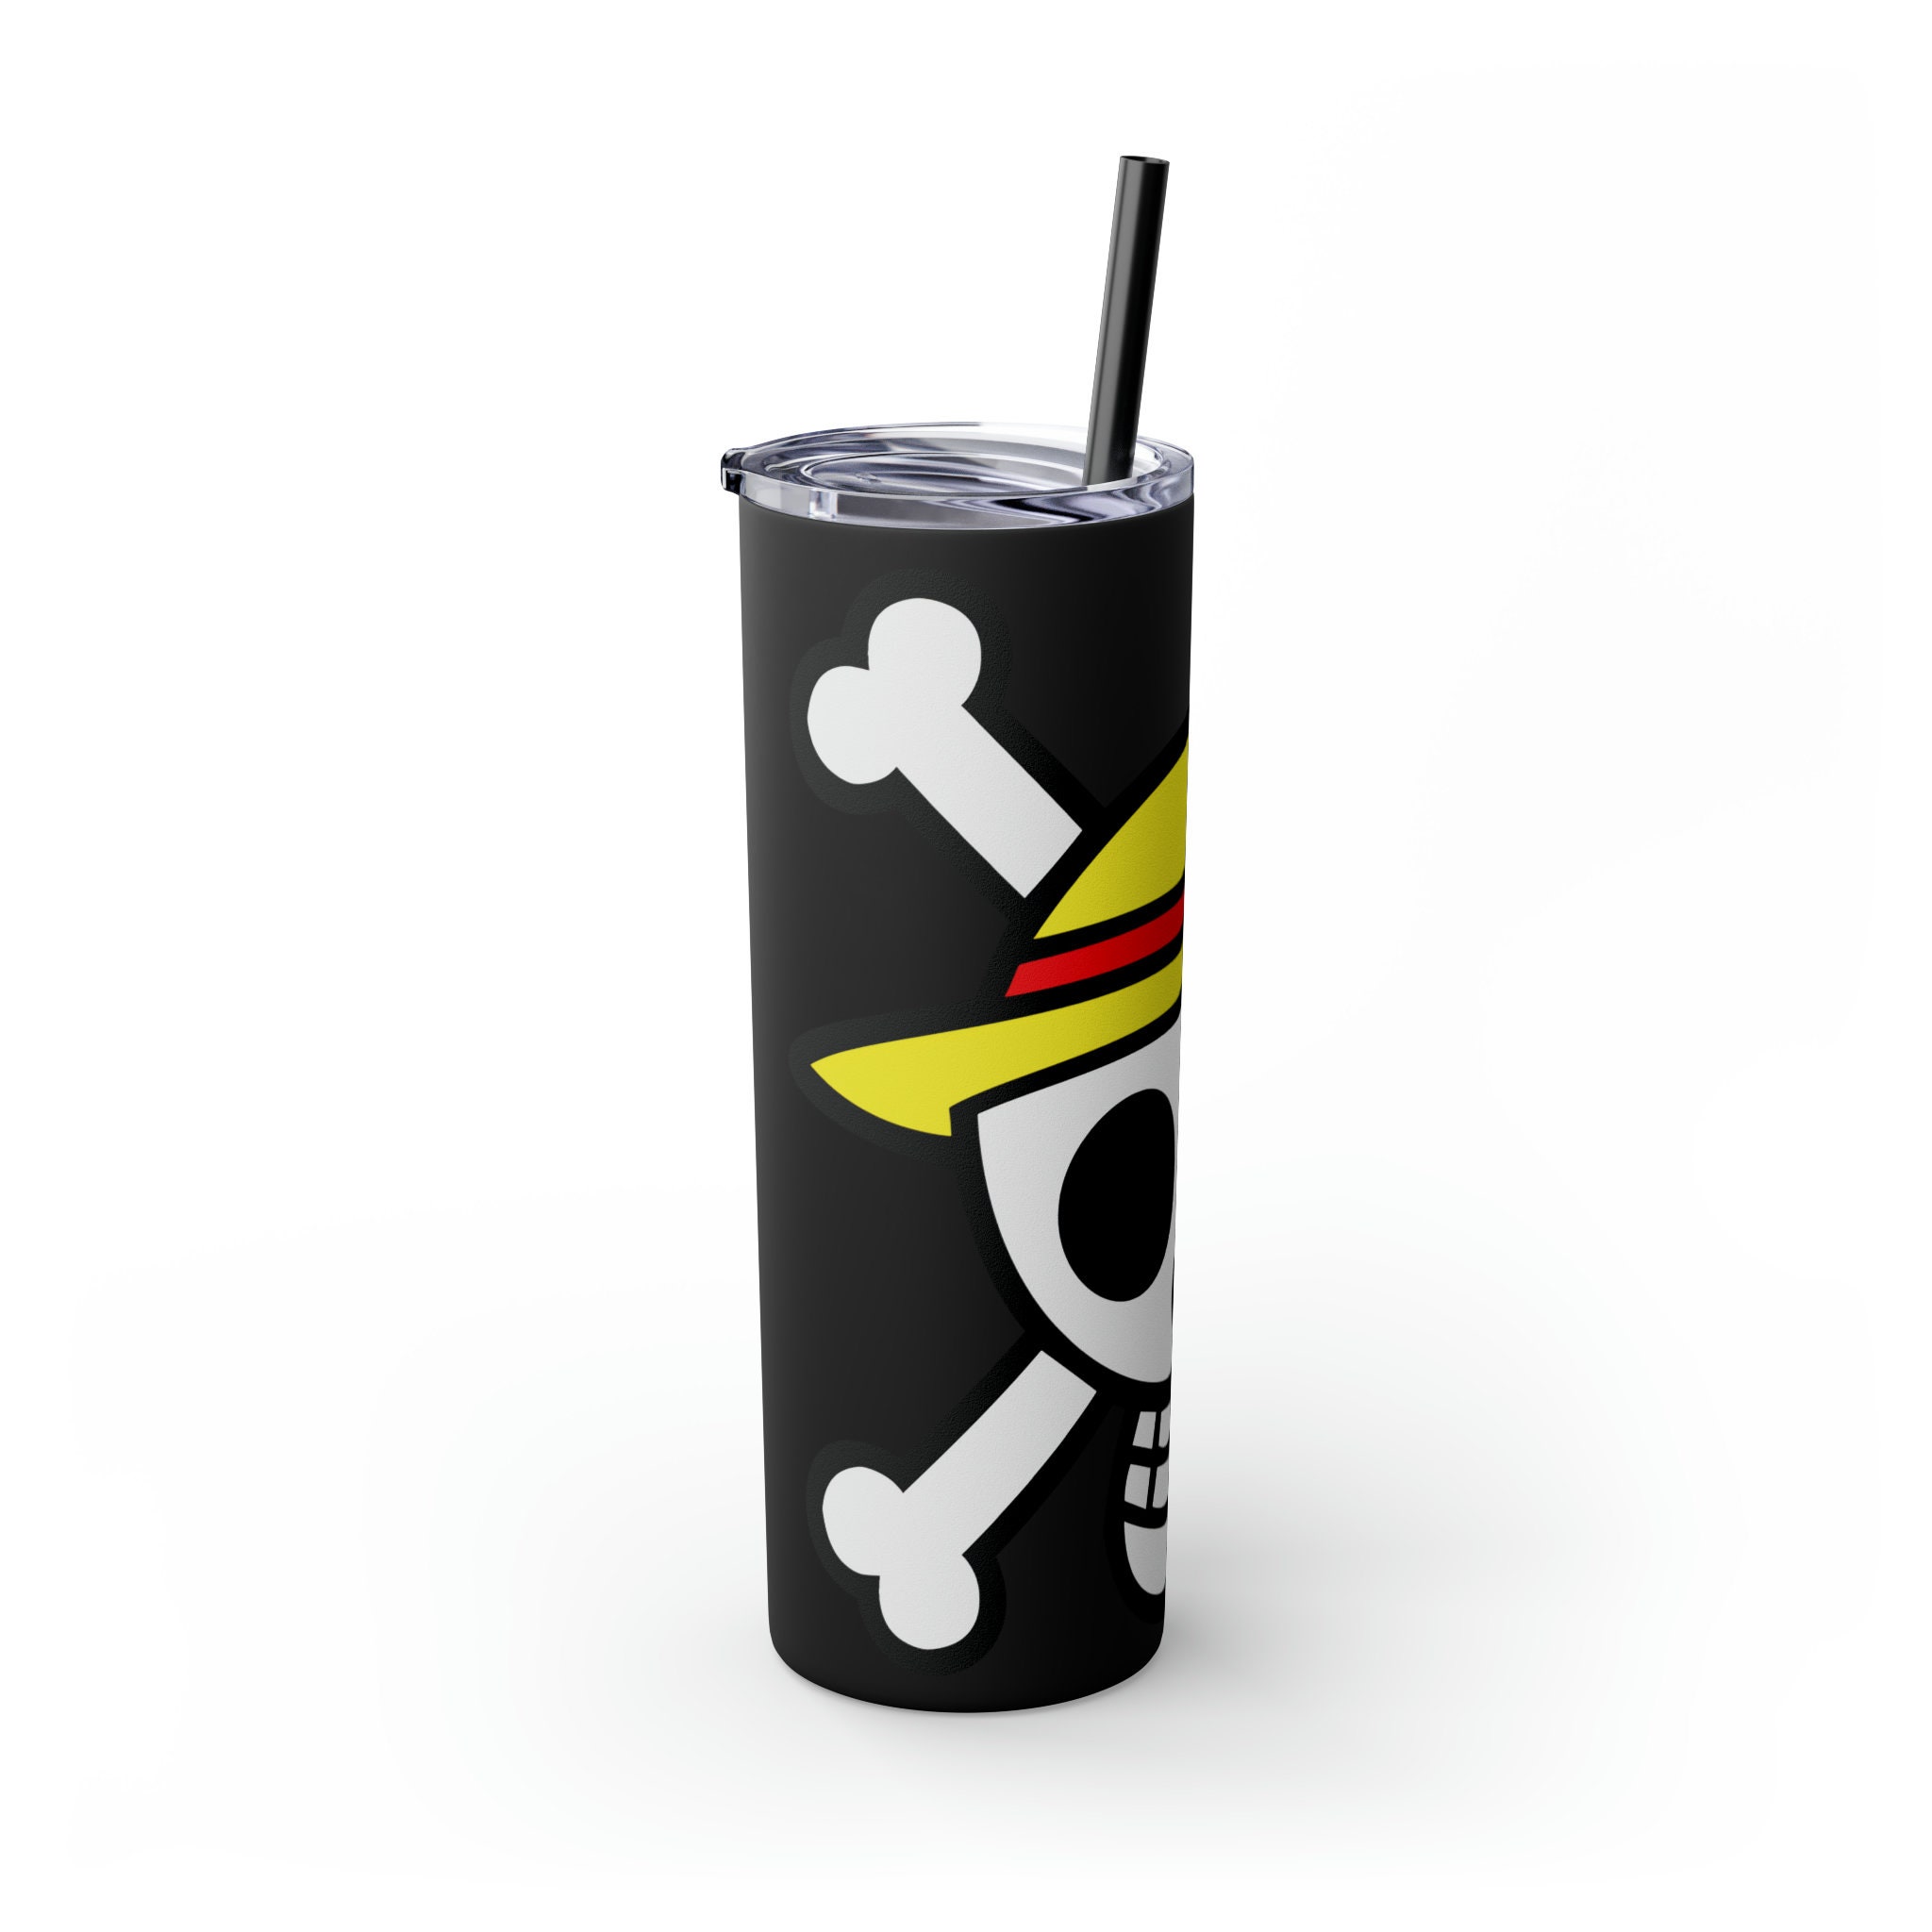 Luffy And Ace Custom One Piece Anime Tumbler Cup $159.00 $38.99